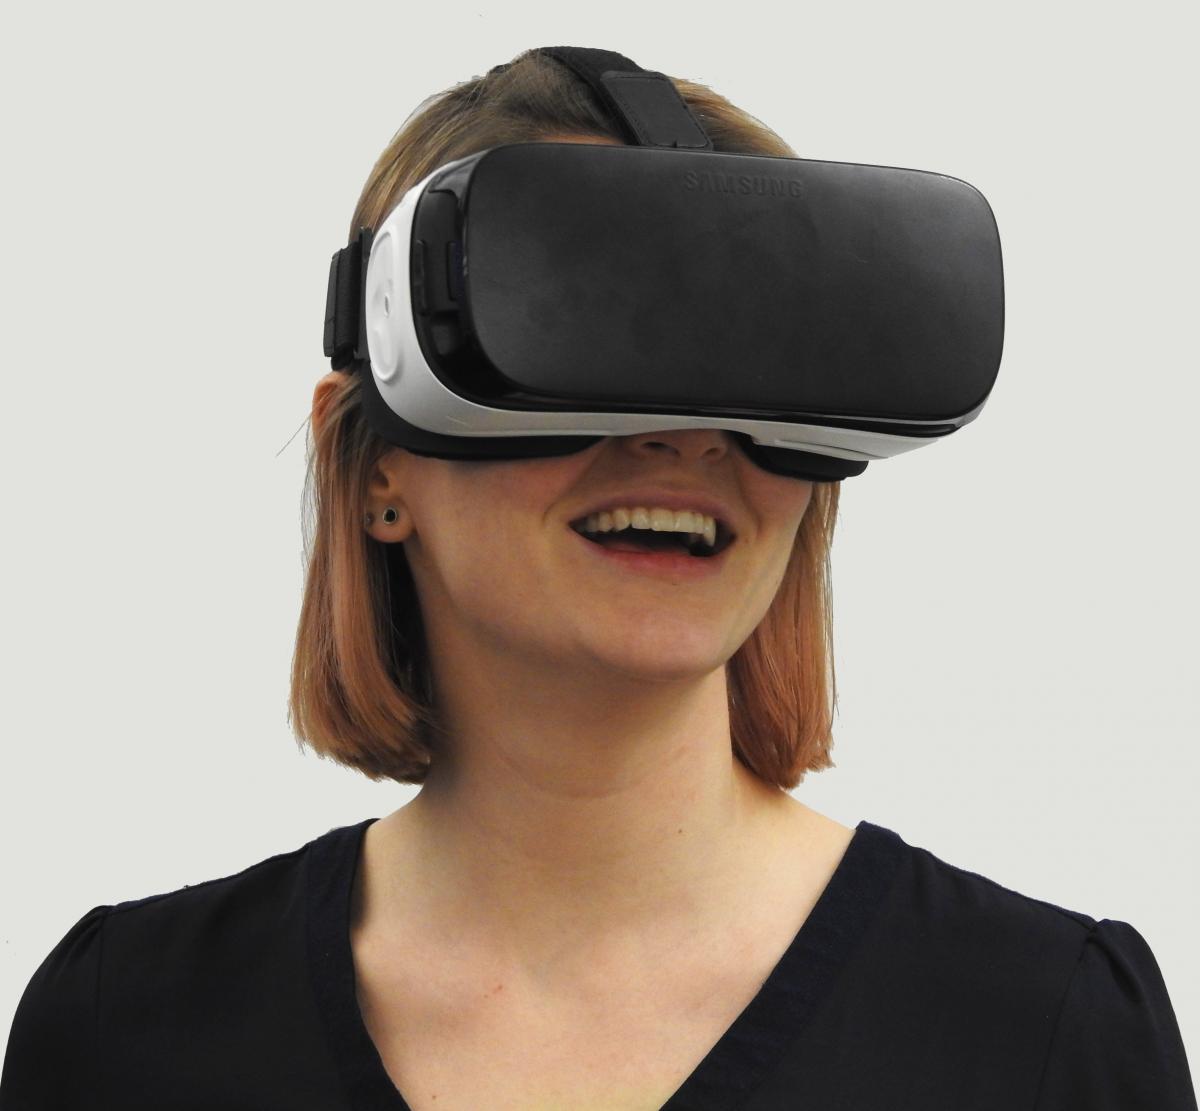 wearing virtual reality headset being worn by a woman